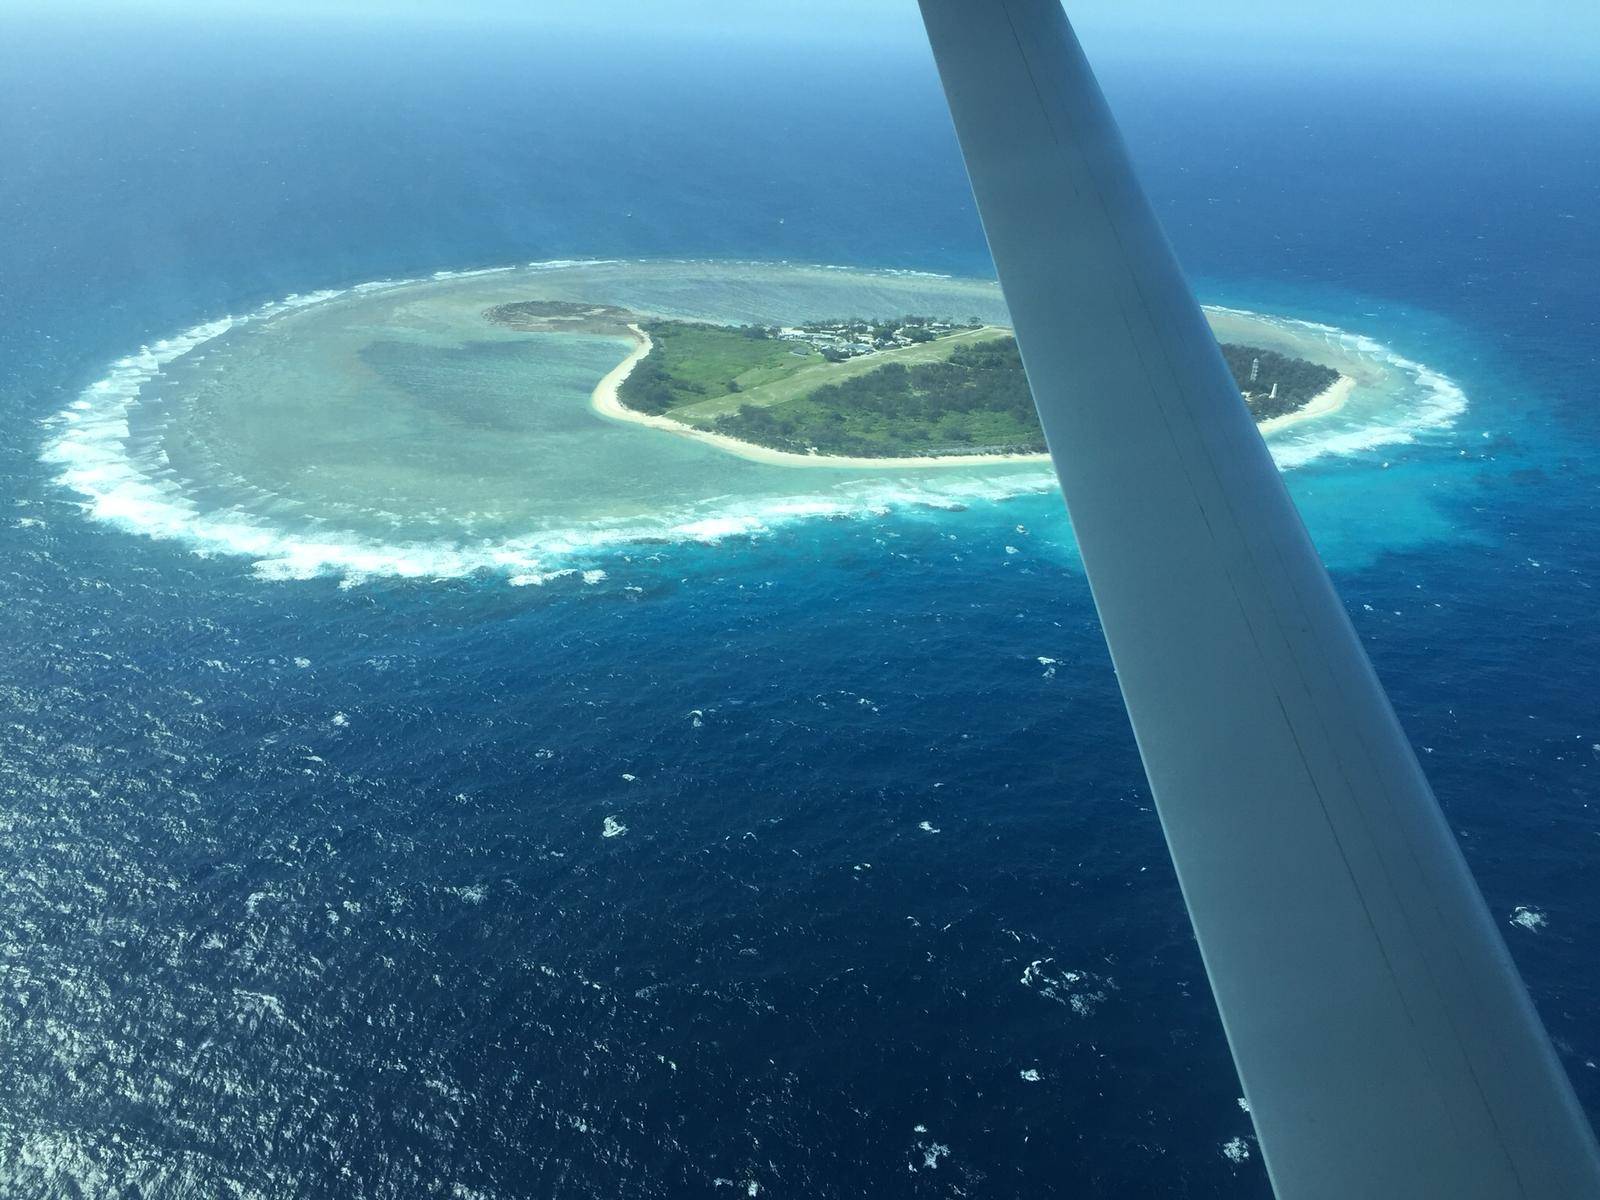 The view of Lady Elliot Island from the small plane